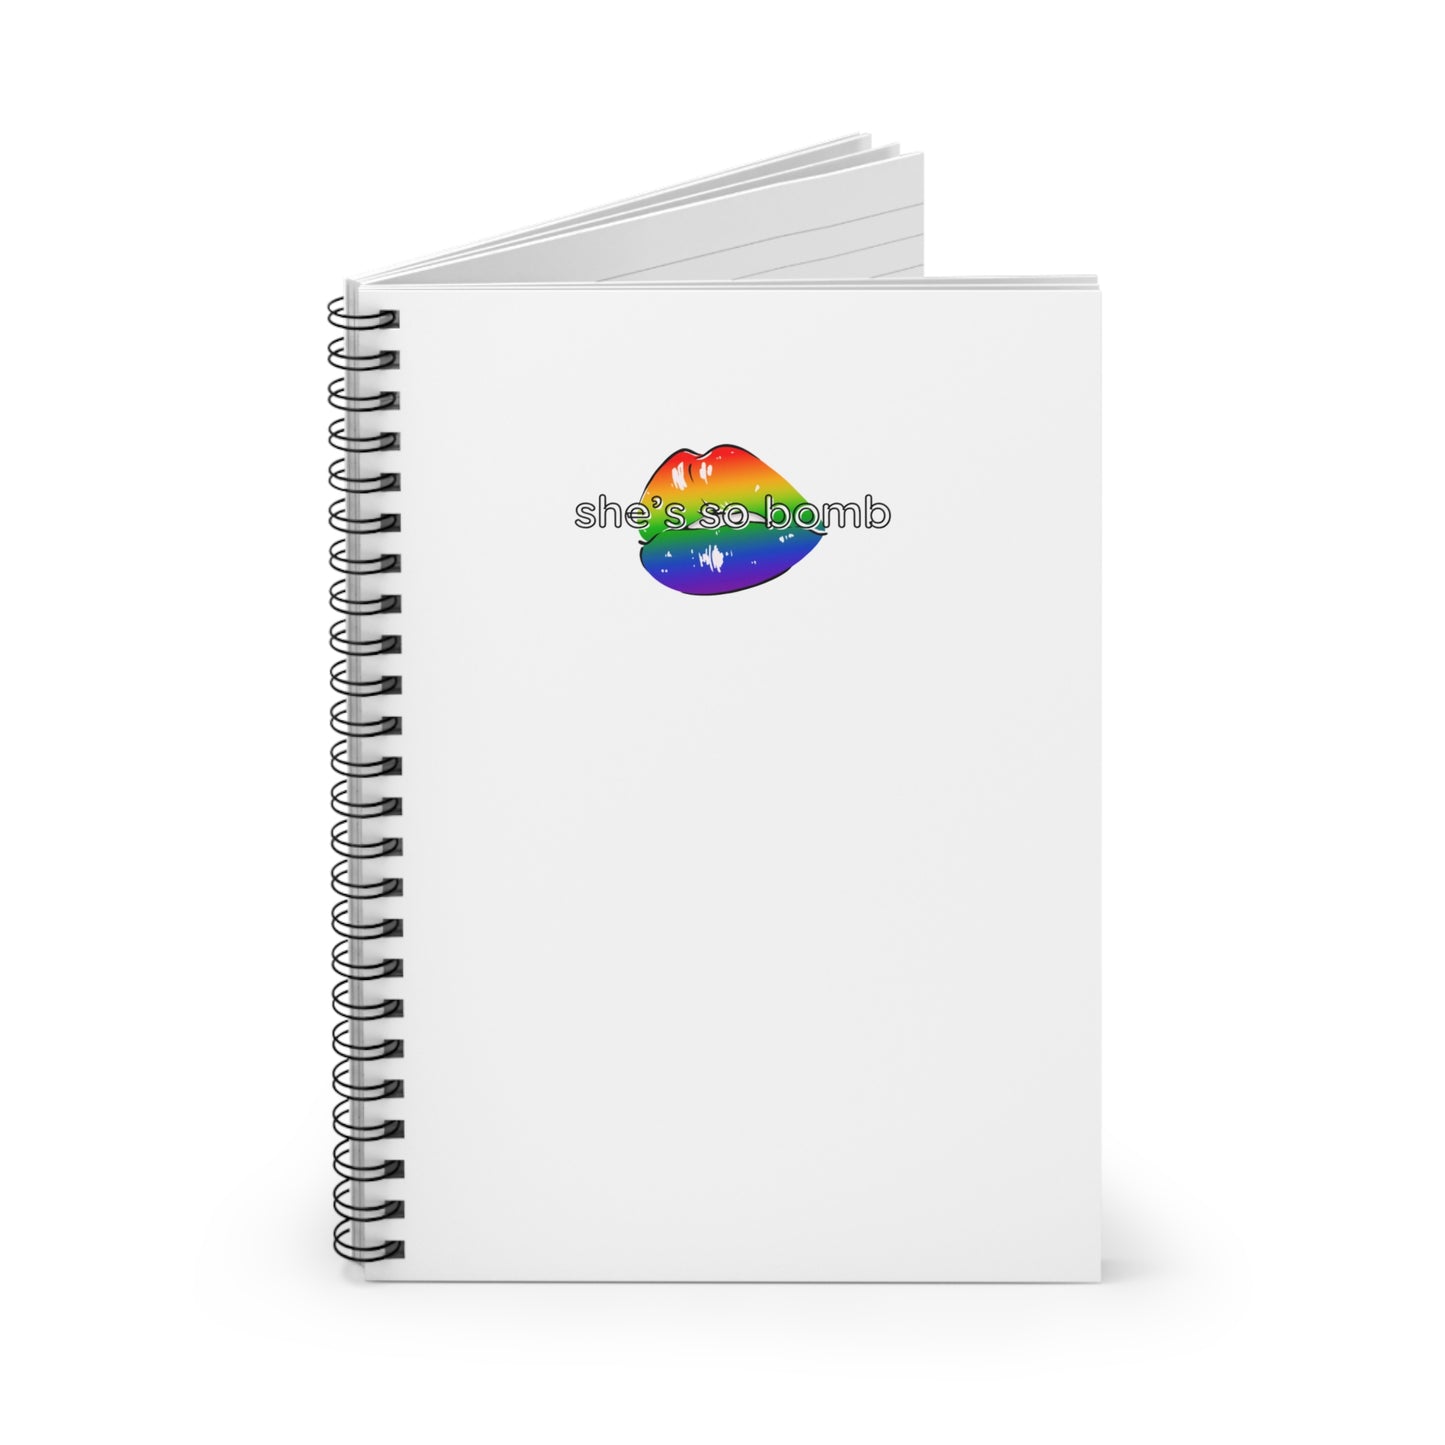 RAINBOW BOMB LIPS Spiral Notebook - Ruled Line